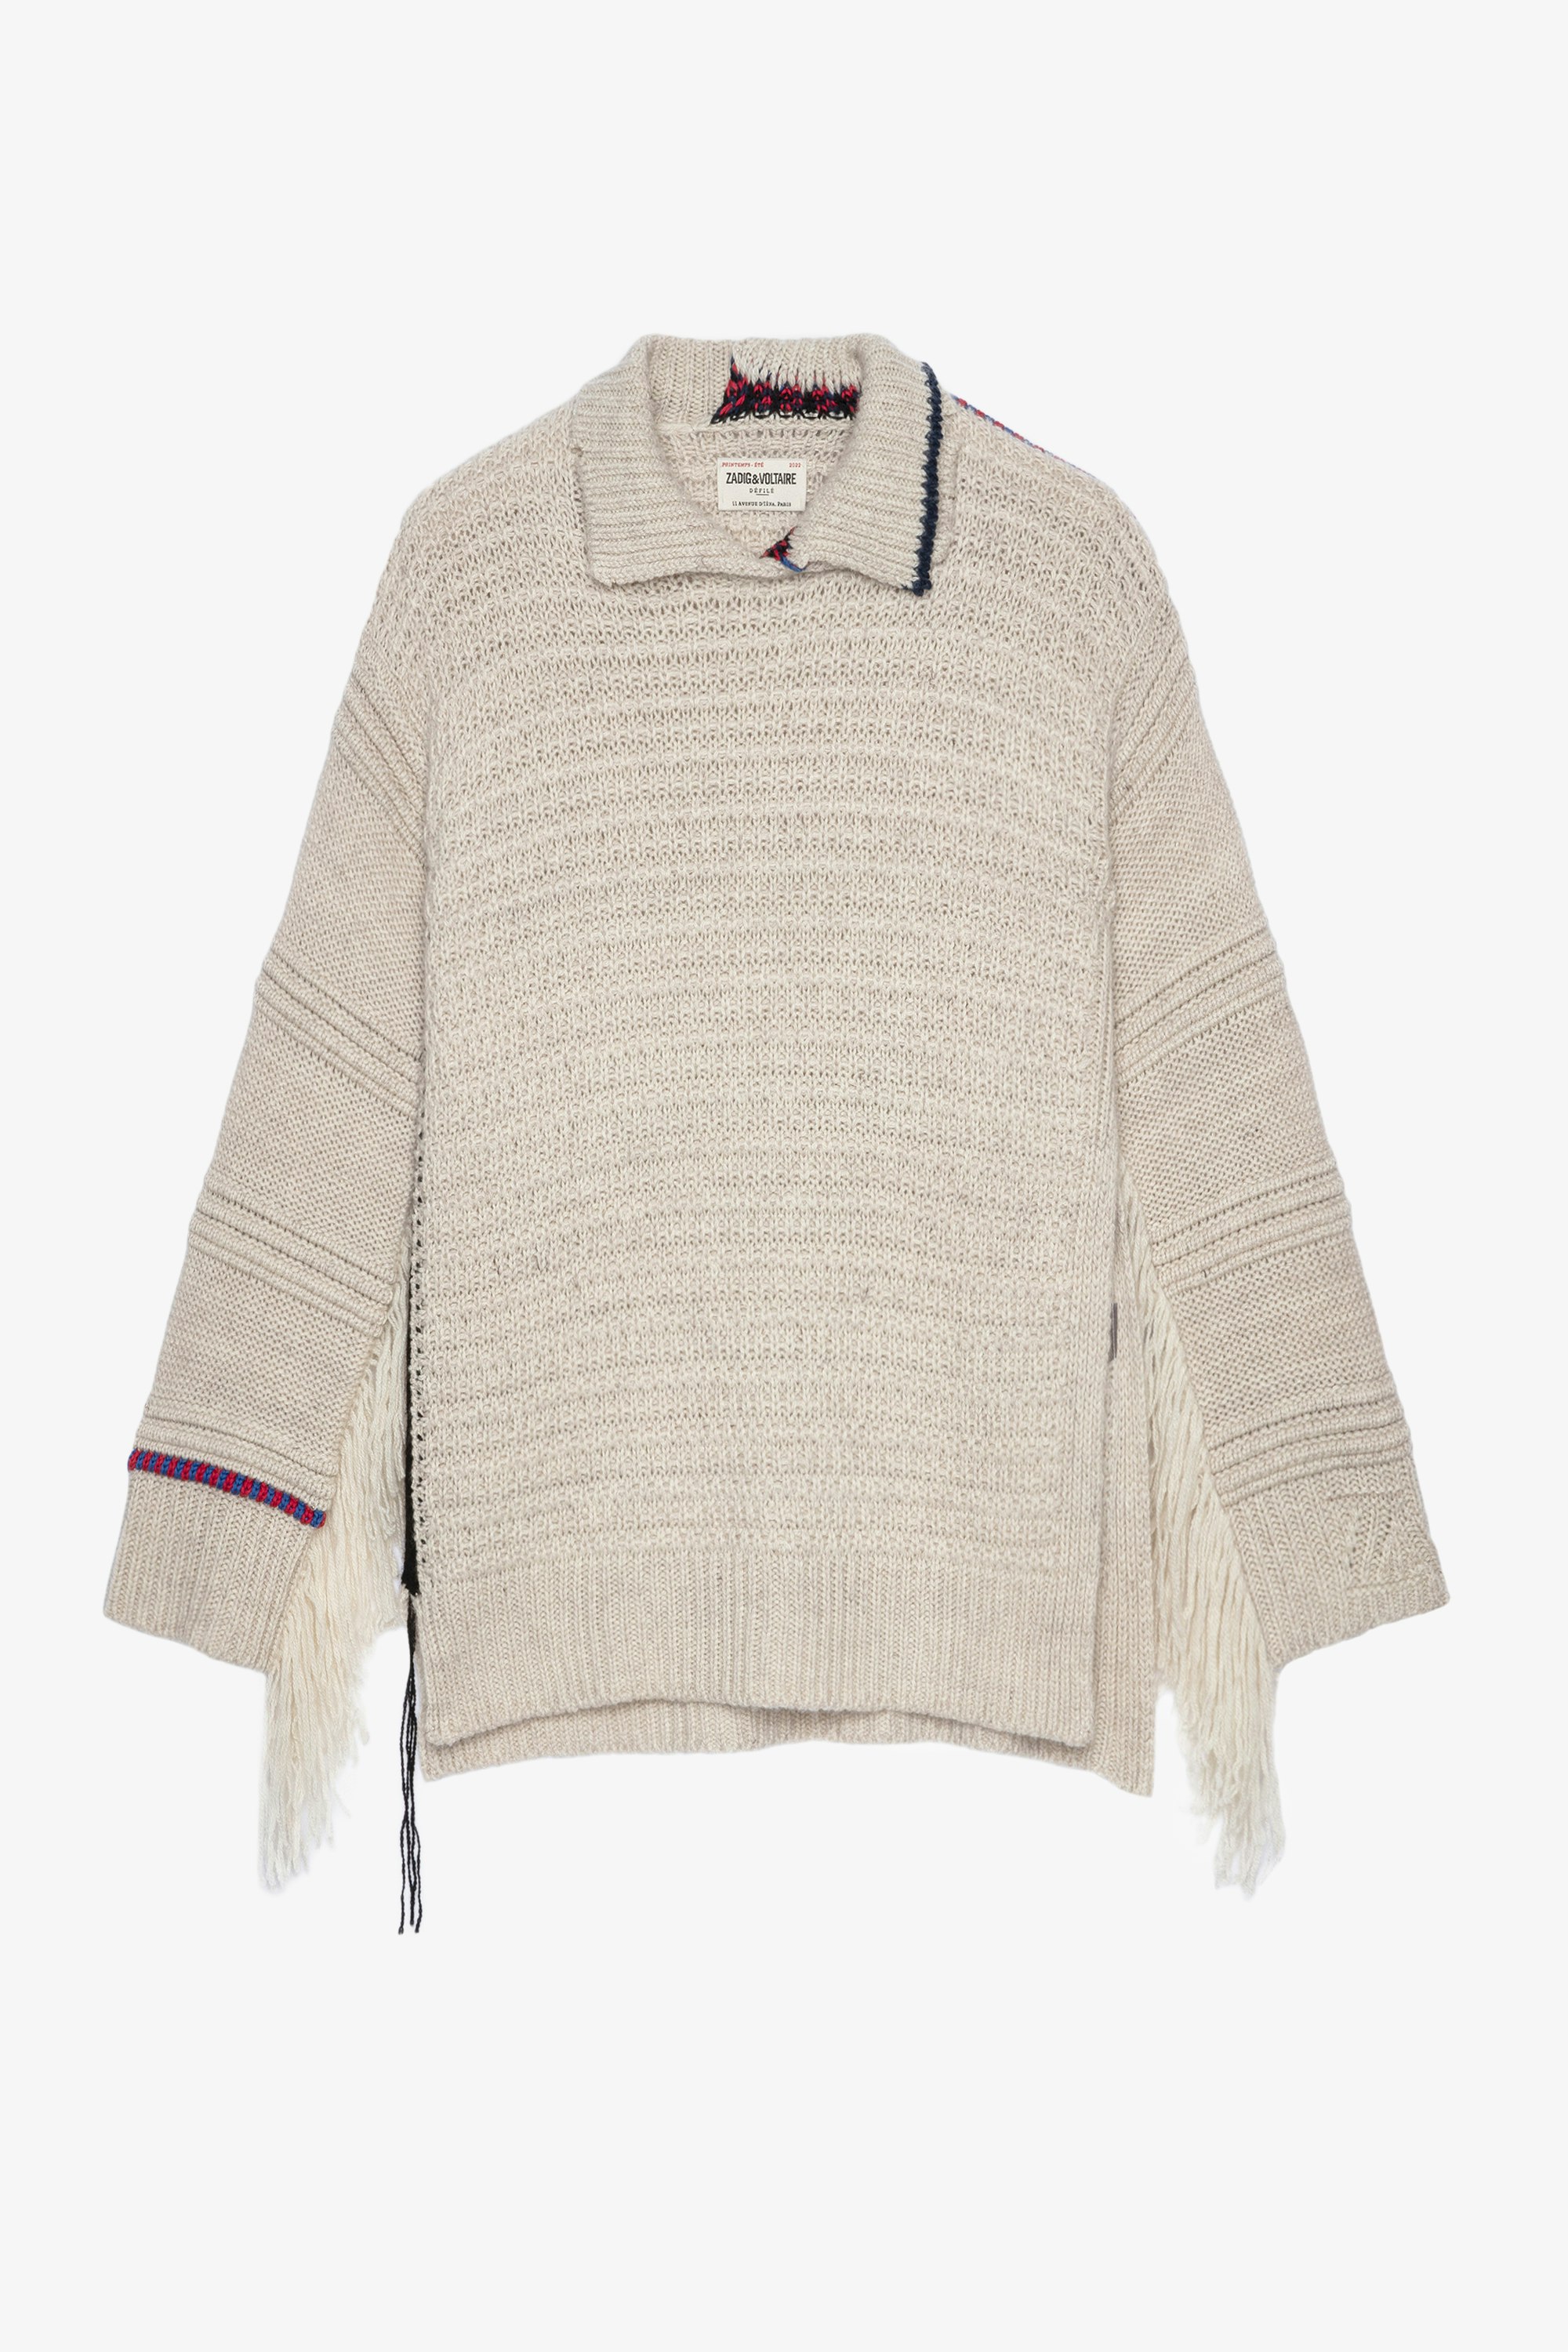 Cassidy ニット カシミヤ Women's long jumper in beige knit with fringes